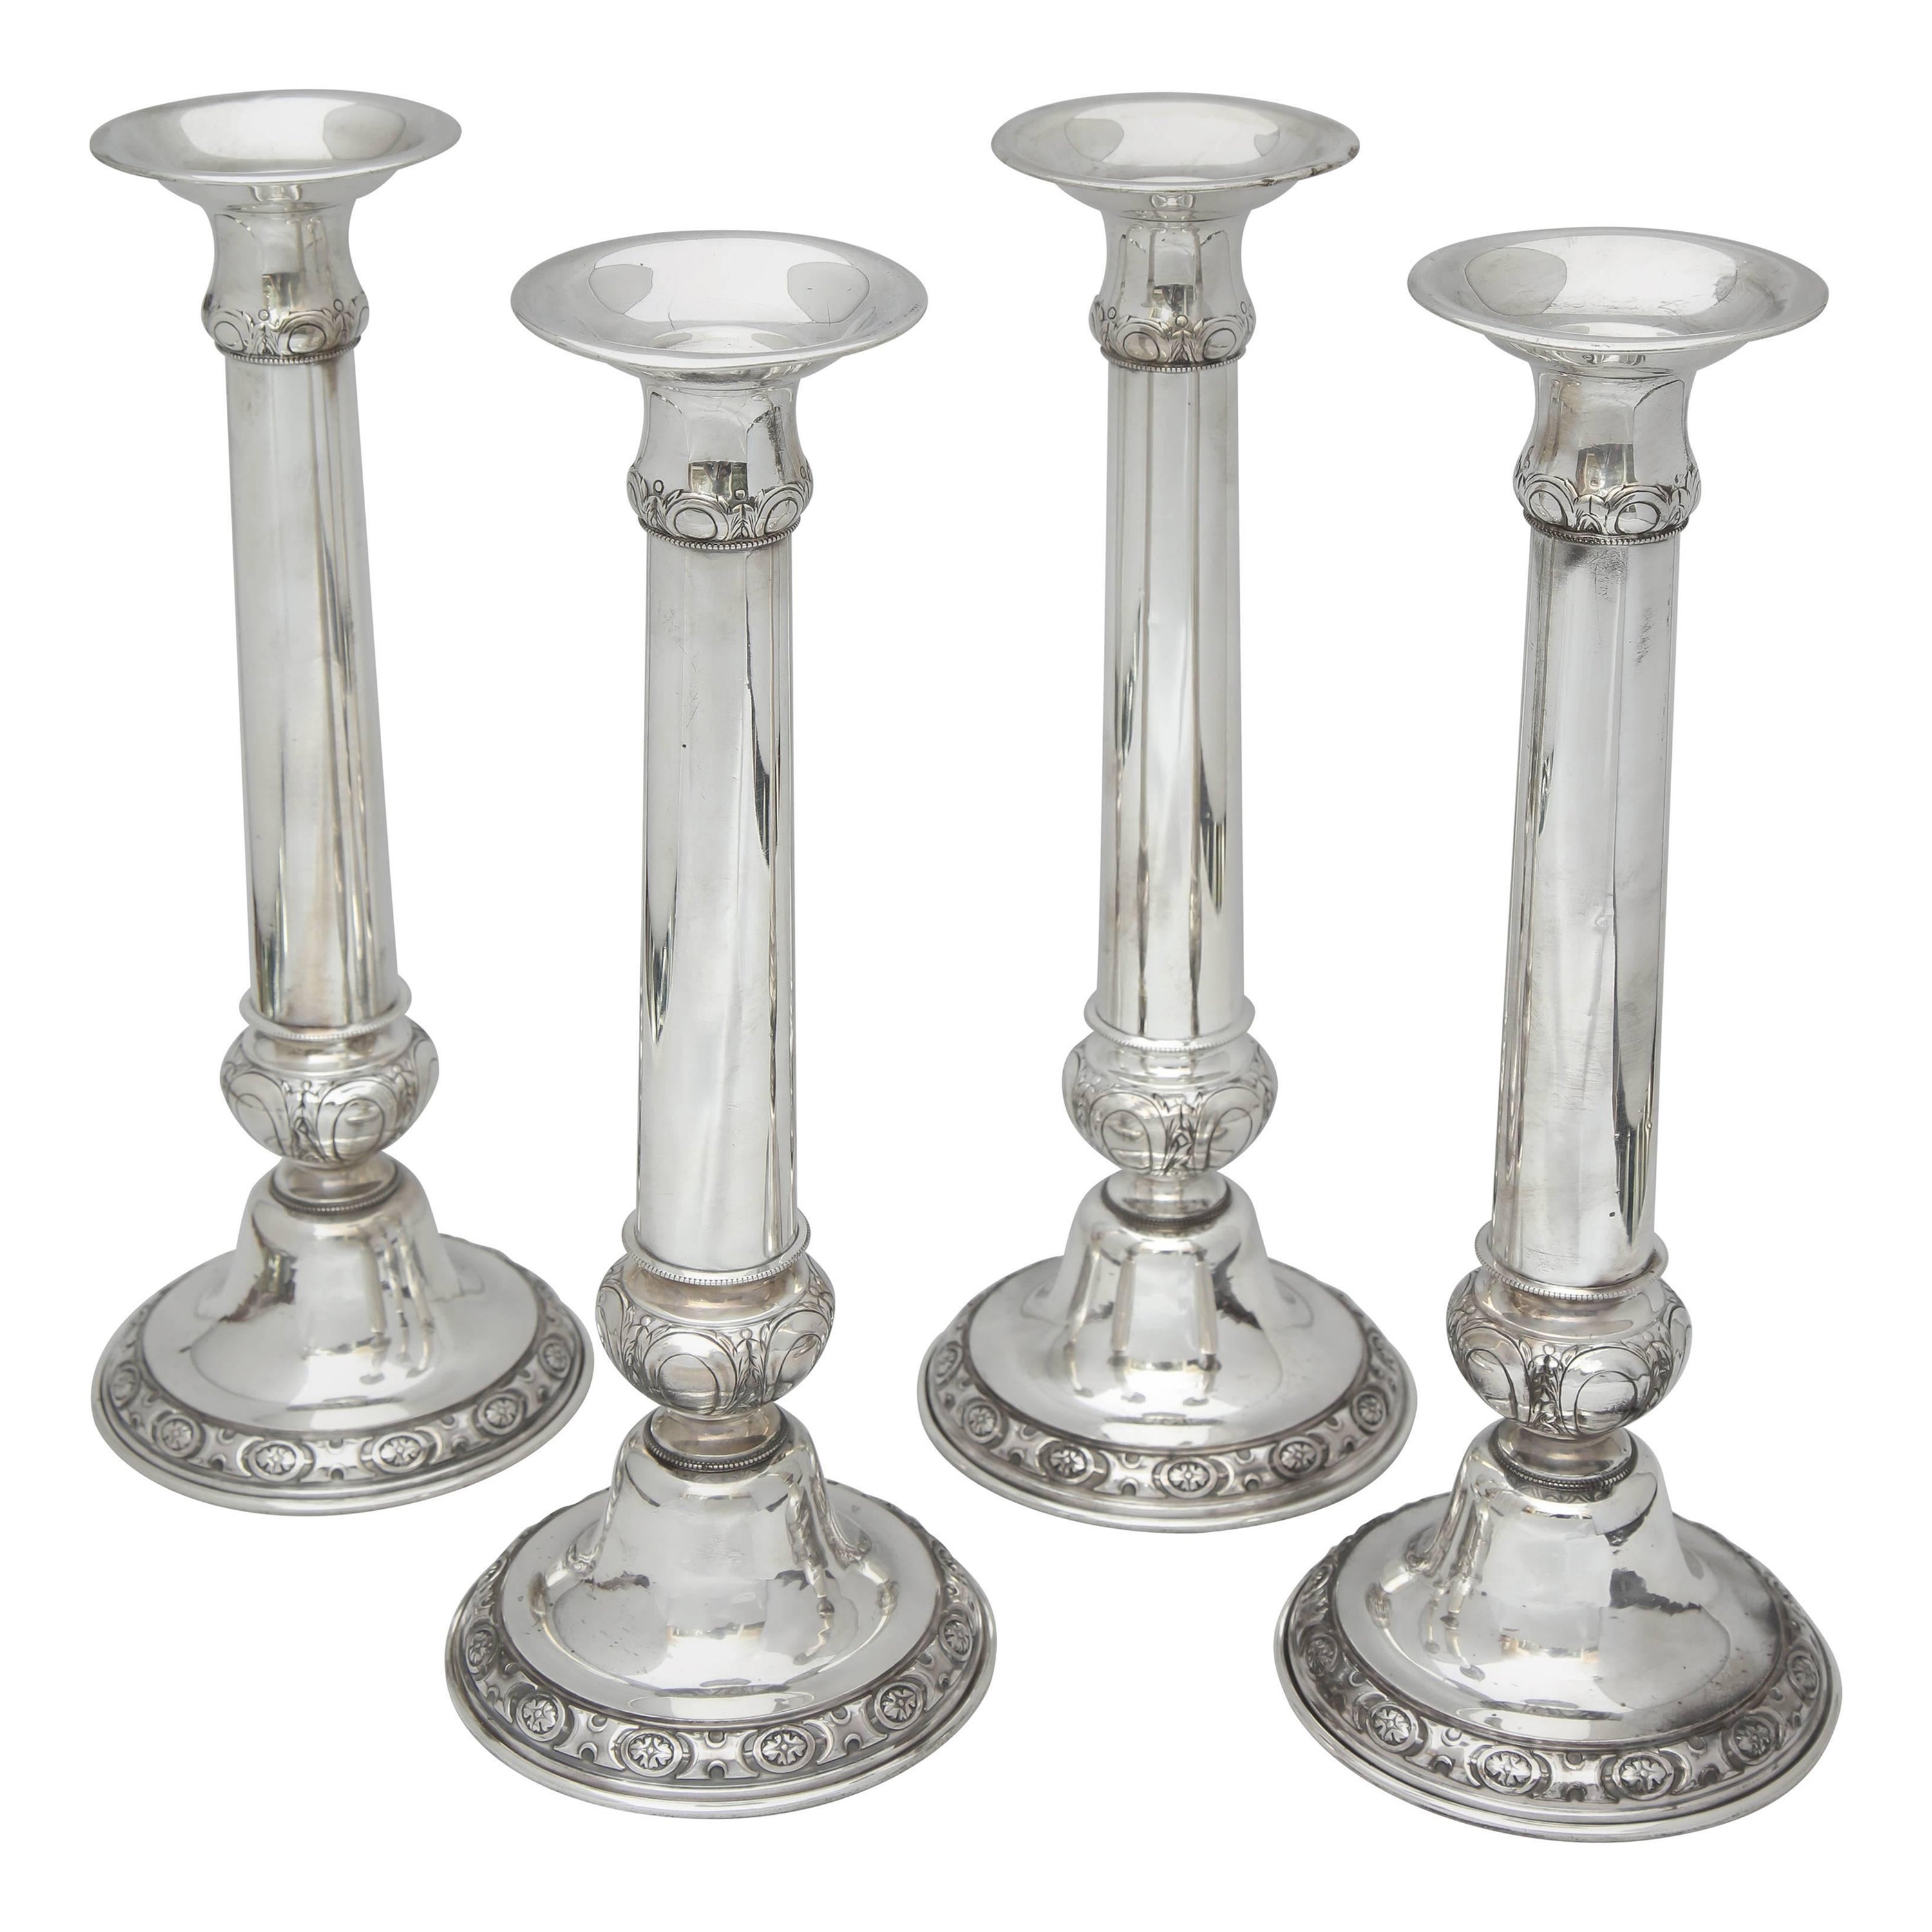 Suite of Four Tall Neoclassical-Style Sterling Silver Candlesticks